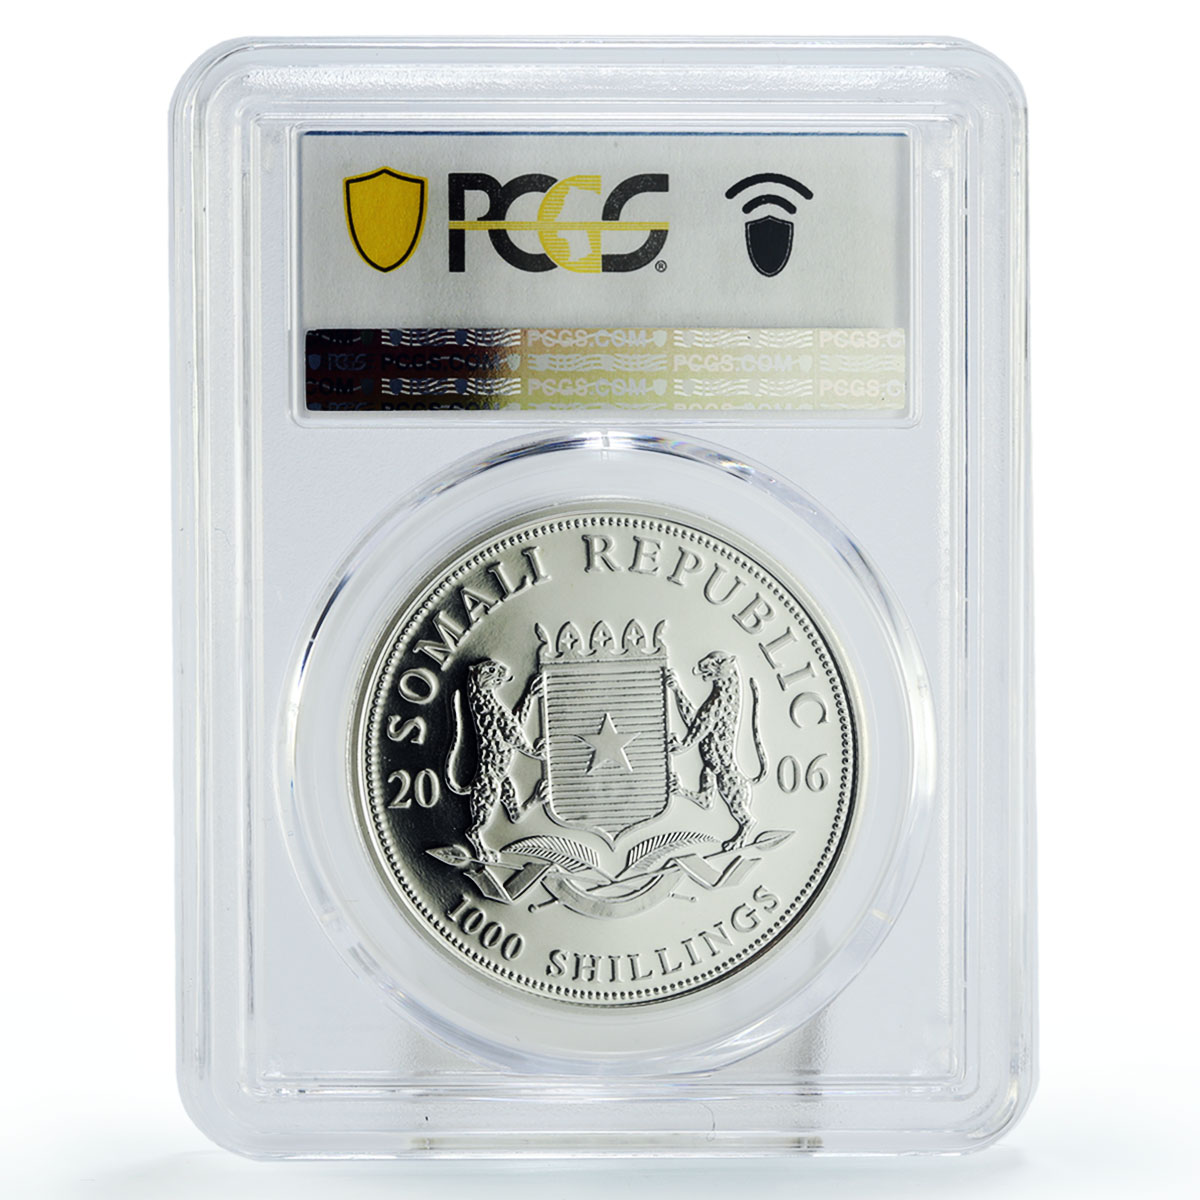 Somalia 1000 shillings African Wildlife Elephant MS70 PCGS silver coin 2006